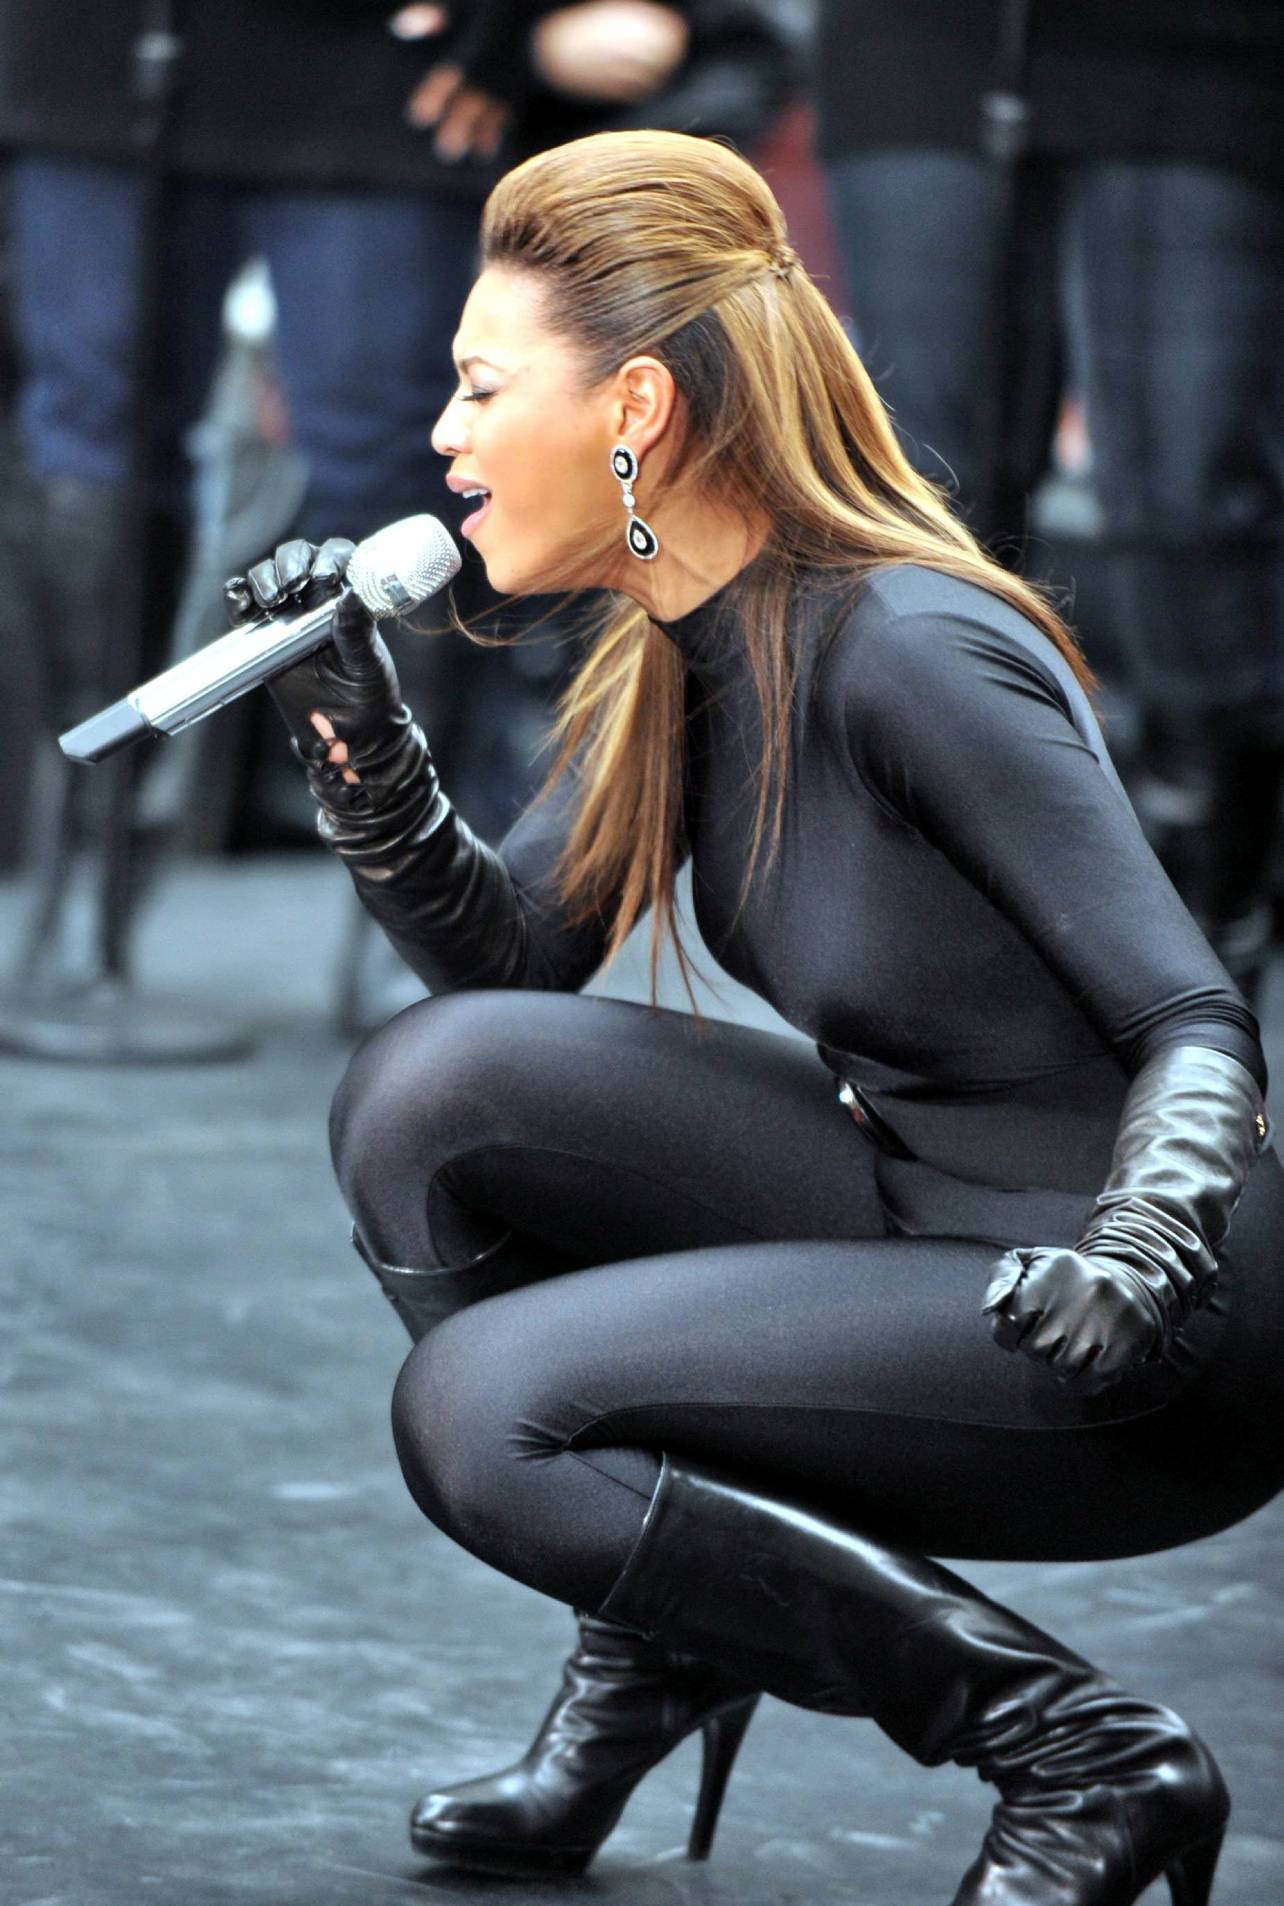 Beyonce Knowles photo #127631.